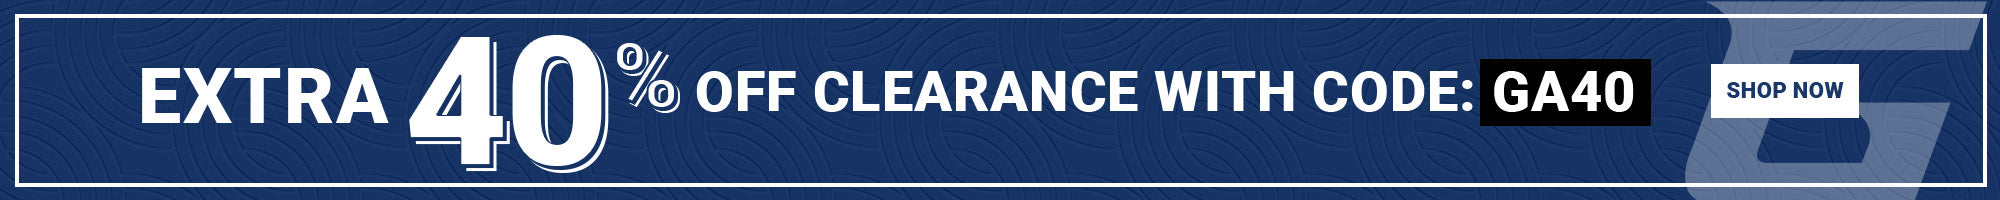 EXTRA 40% OFF CLEARANCE WITH CODE: GA40 | Shop Now